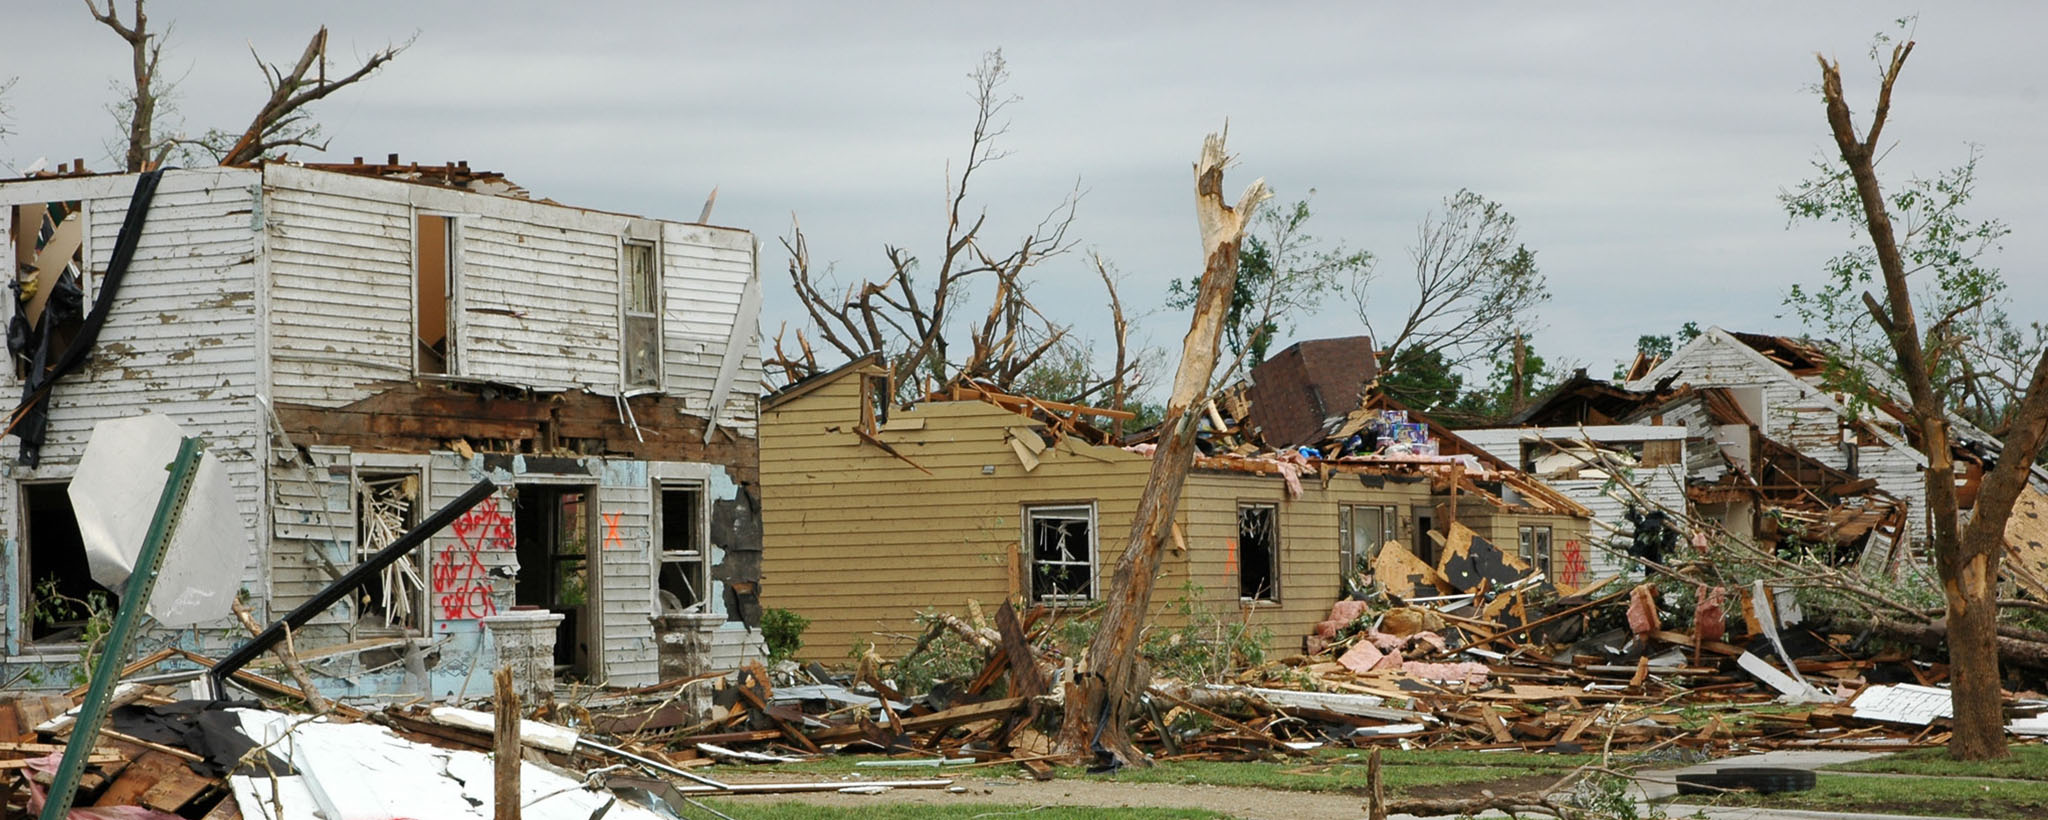 Three houses severely damaged from a tornado.